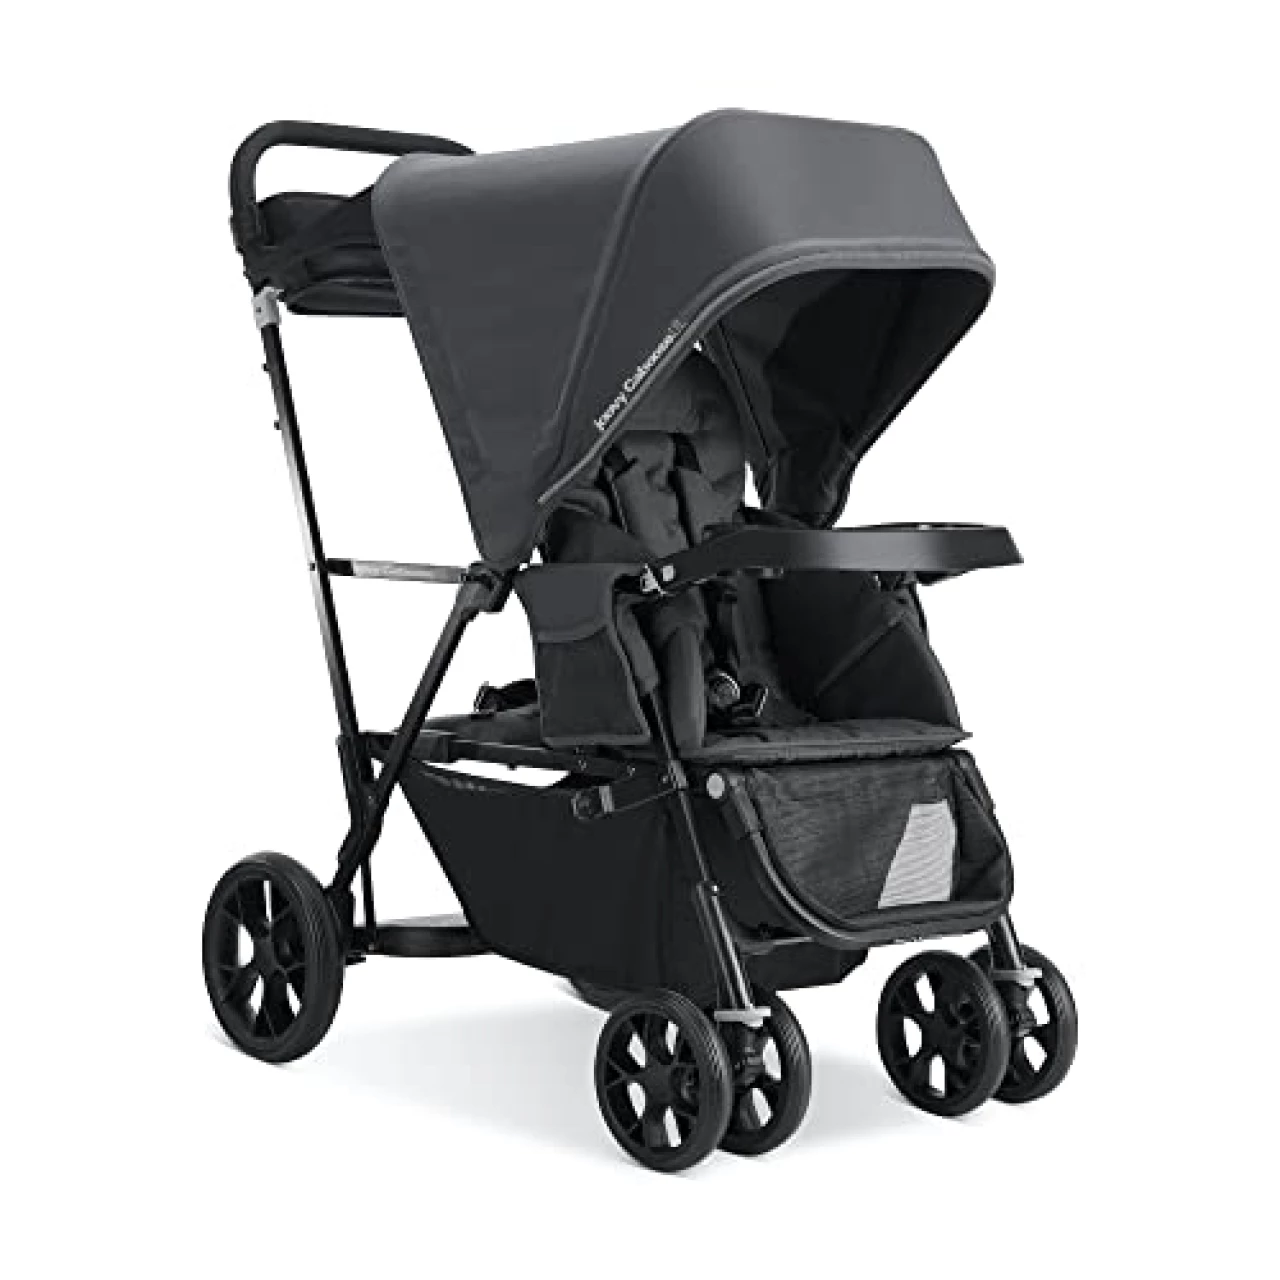 Joovy Caboose UL Sit and Stand Tandem Double Stroller, Jet